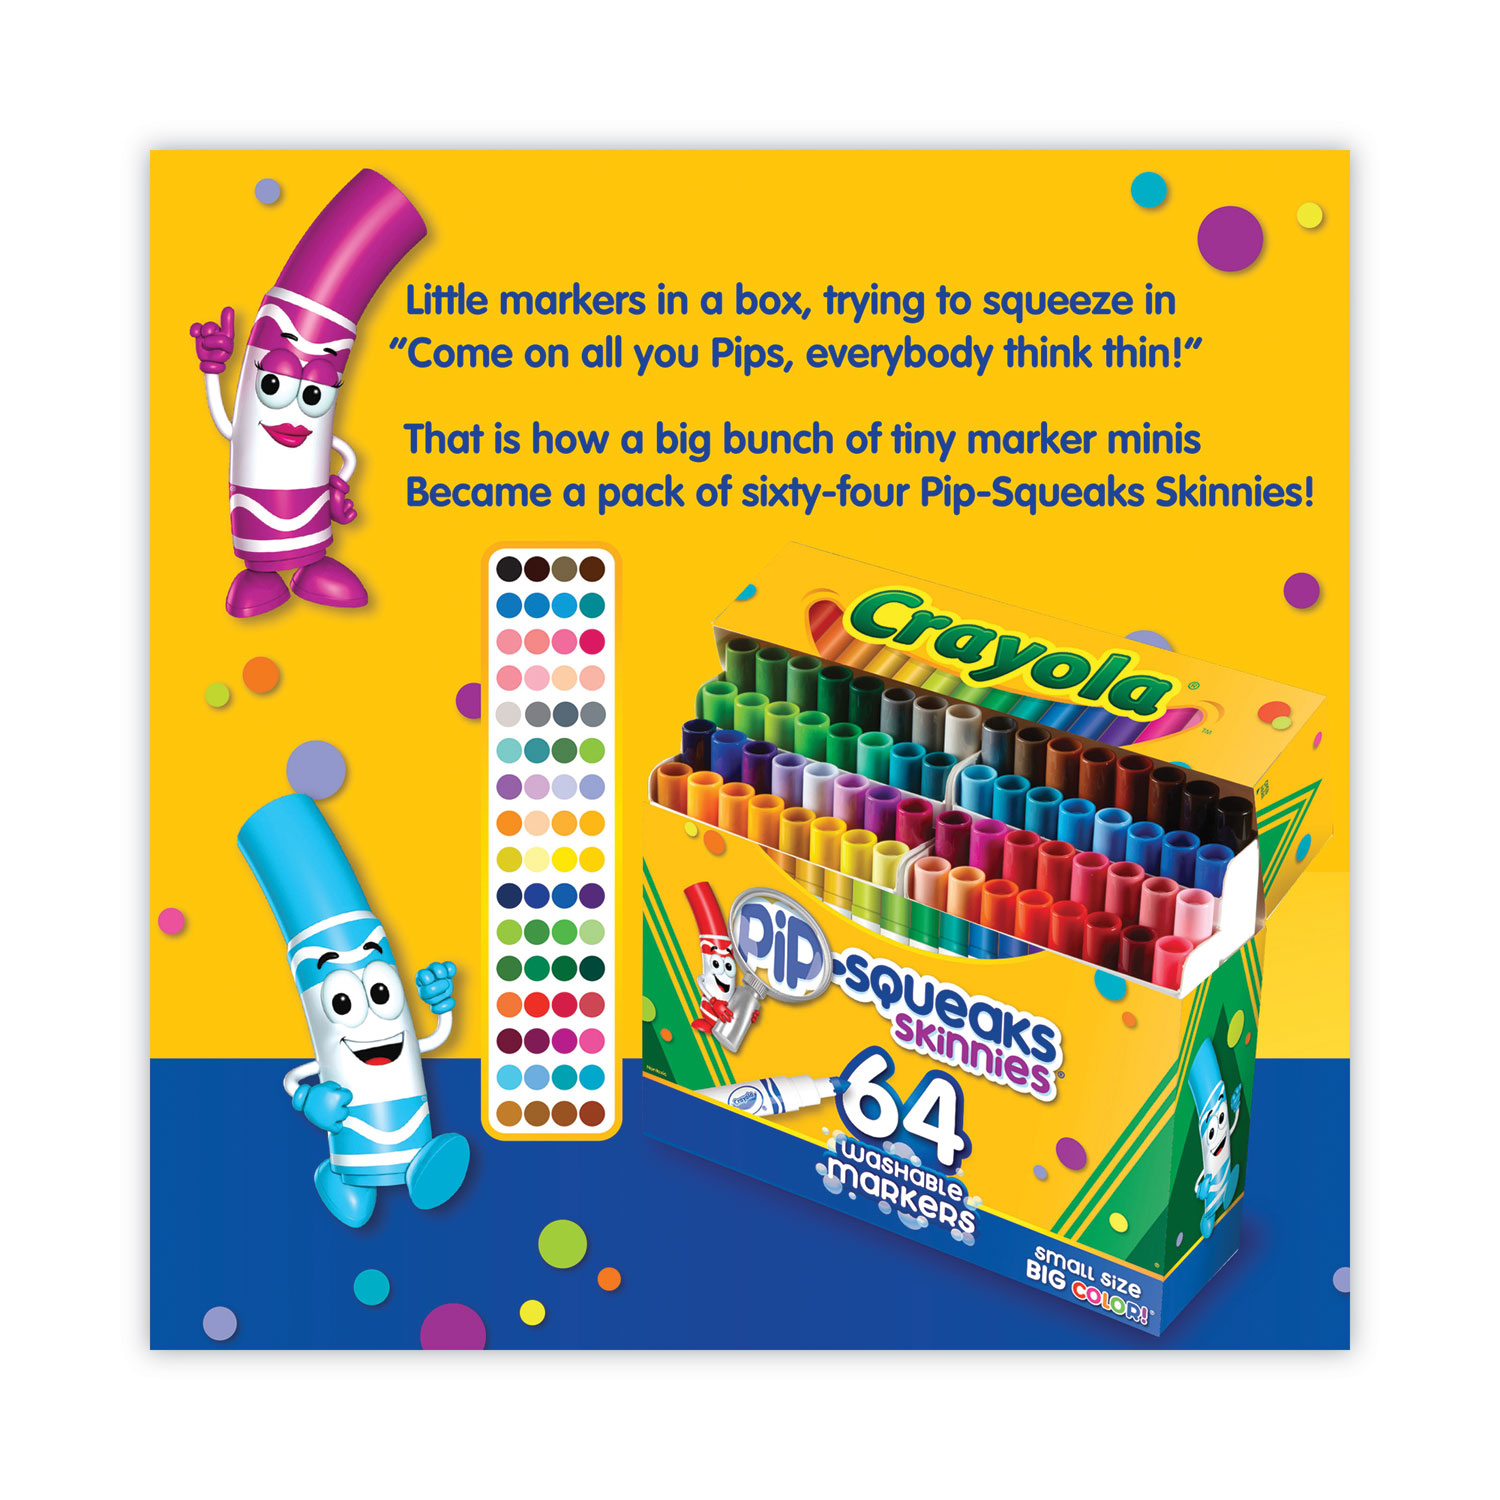 Crayola Pip-squeaks Washable Markers Kit